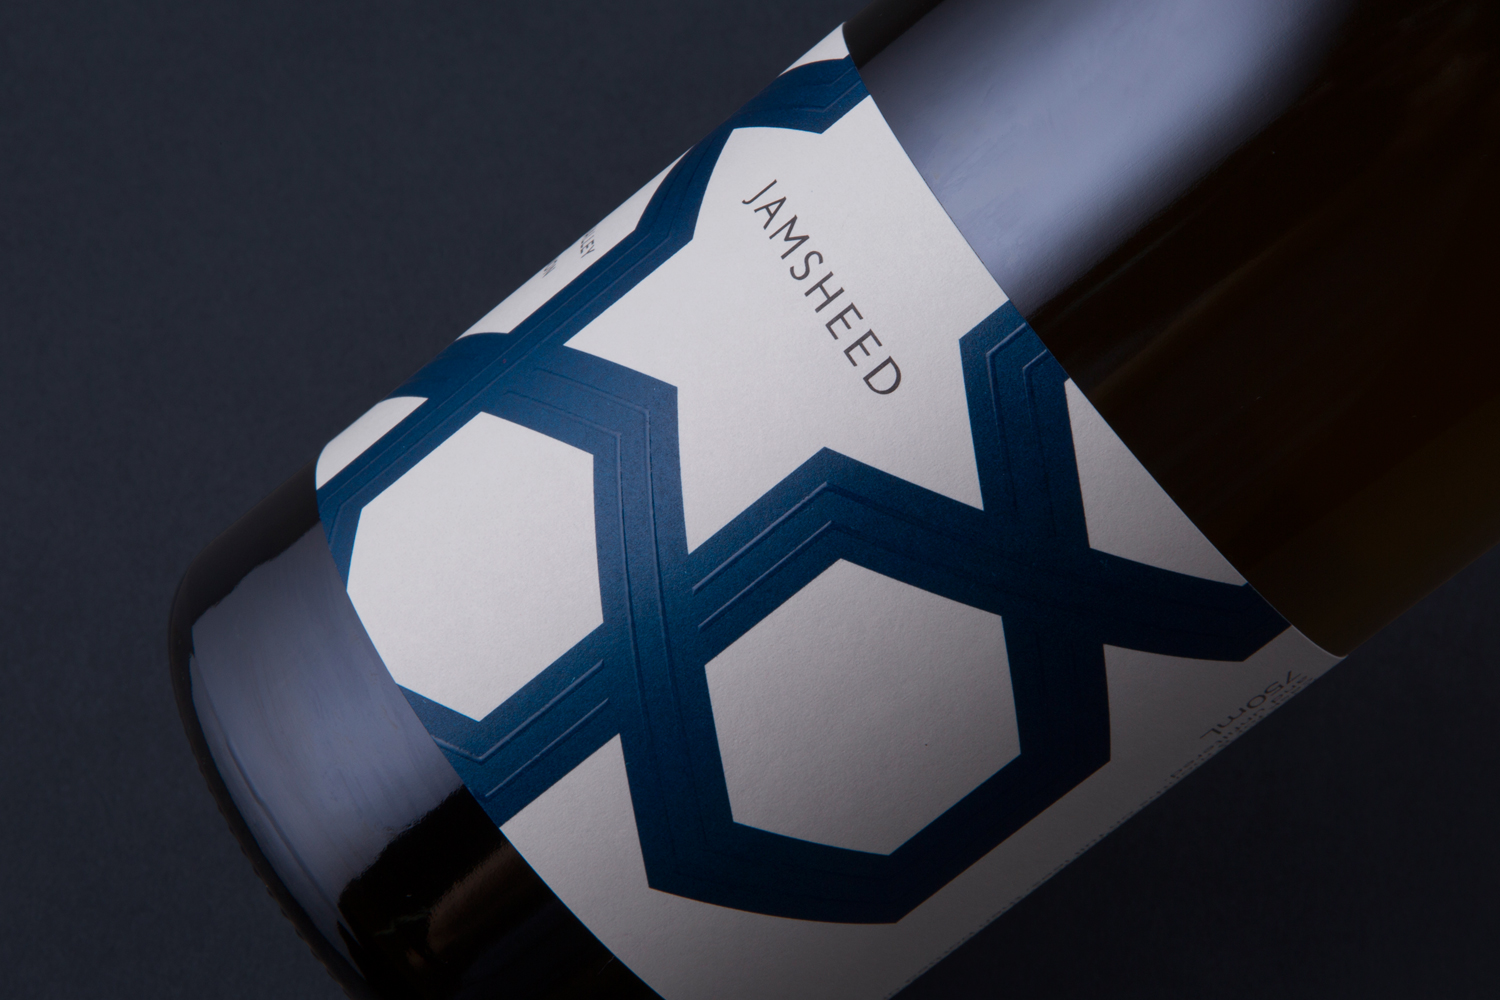 Packaging design by Cloudy Co. for Yarra Valley boutique wine label Jamsheed